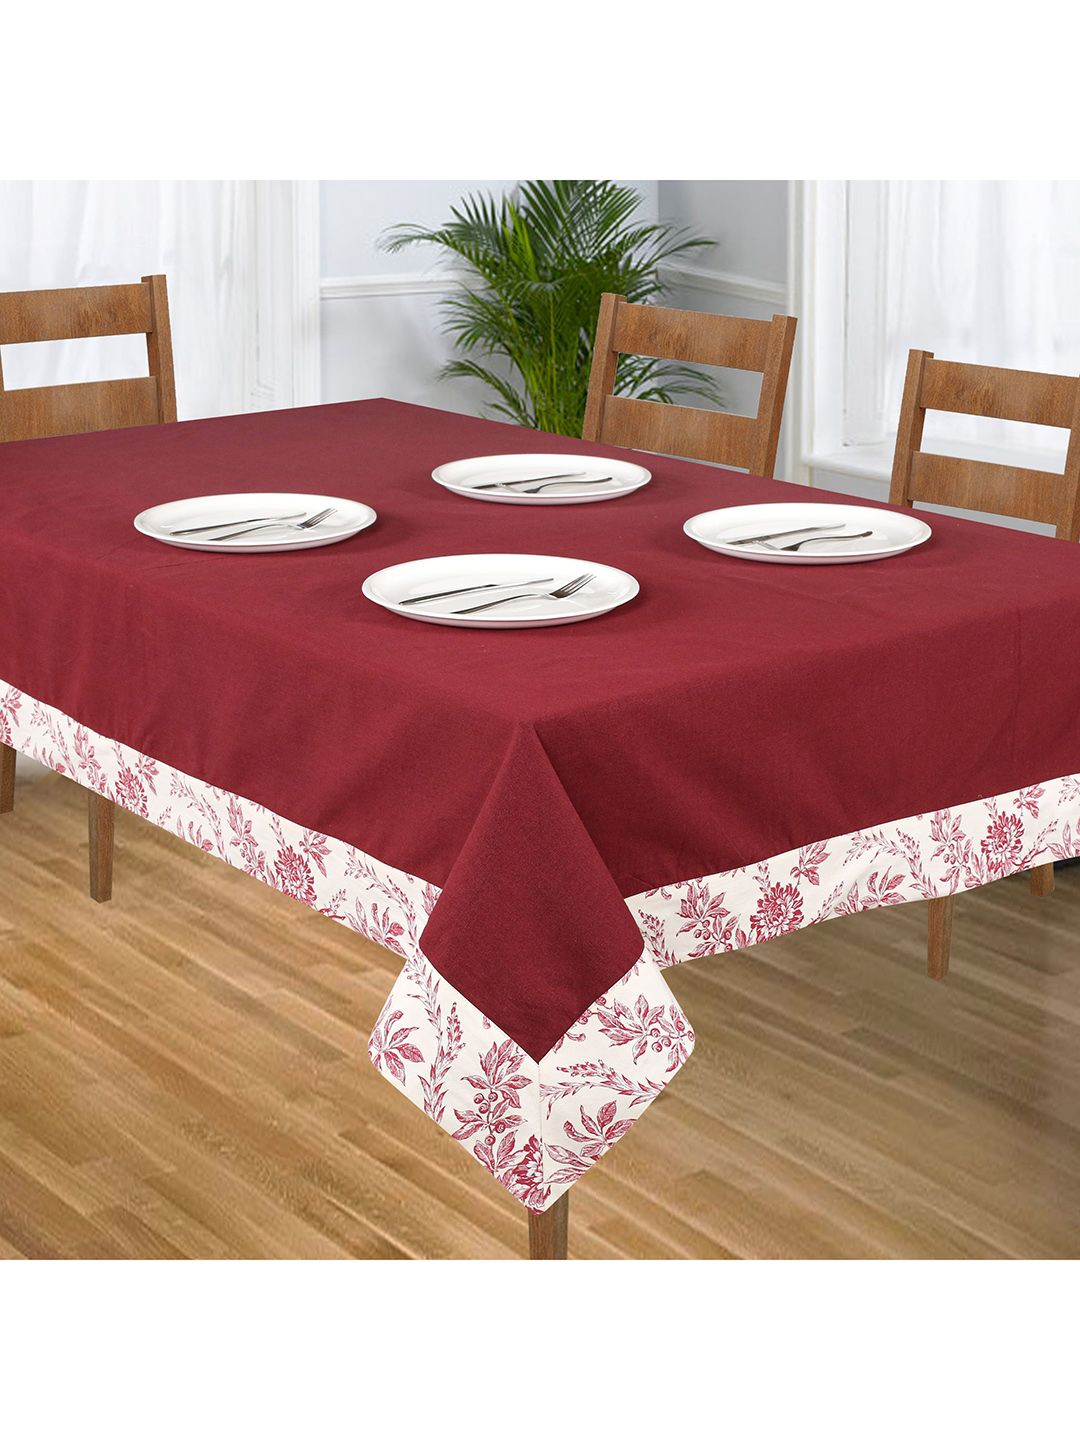 SHADES of LIFE Maroon Solid 6-Seater Rectangle Cotton Table Cover Price in India